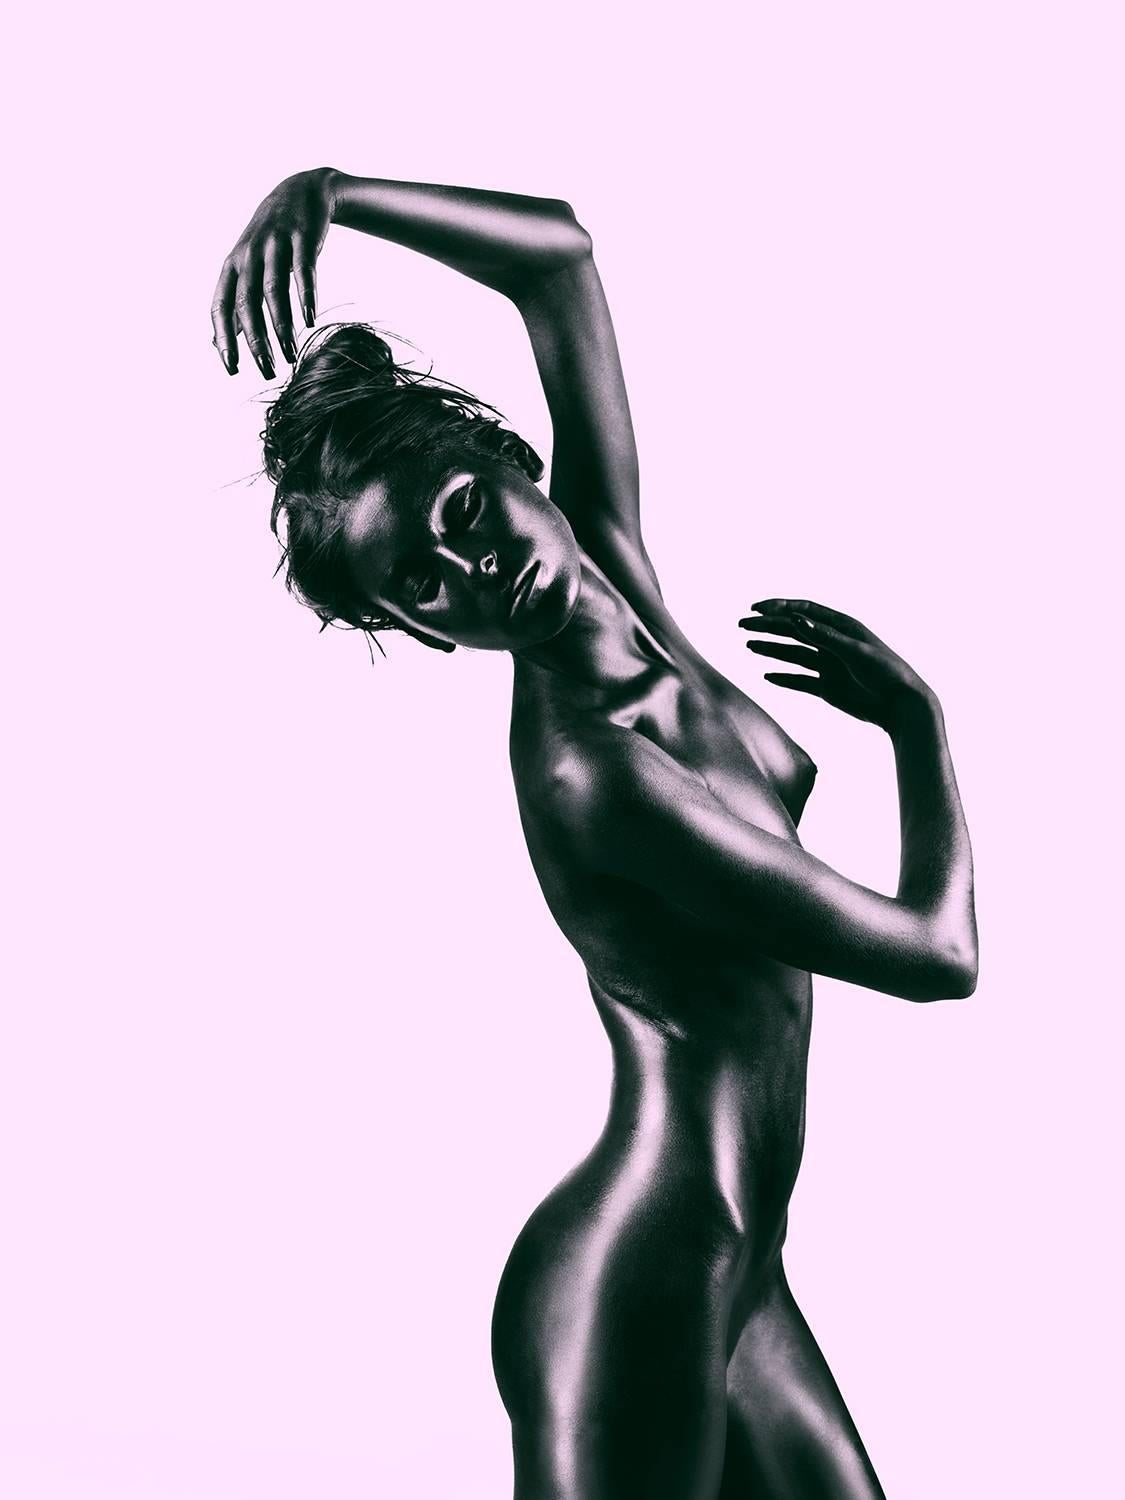 Brasov Figurative Photograph - 'Pink Nude' Open Edition C Type 